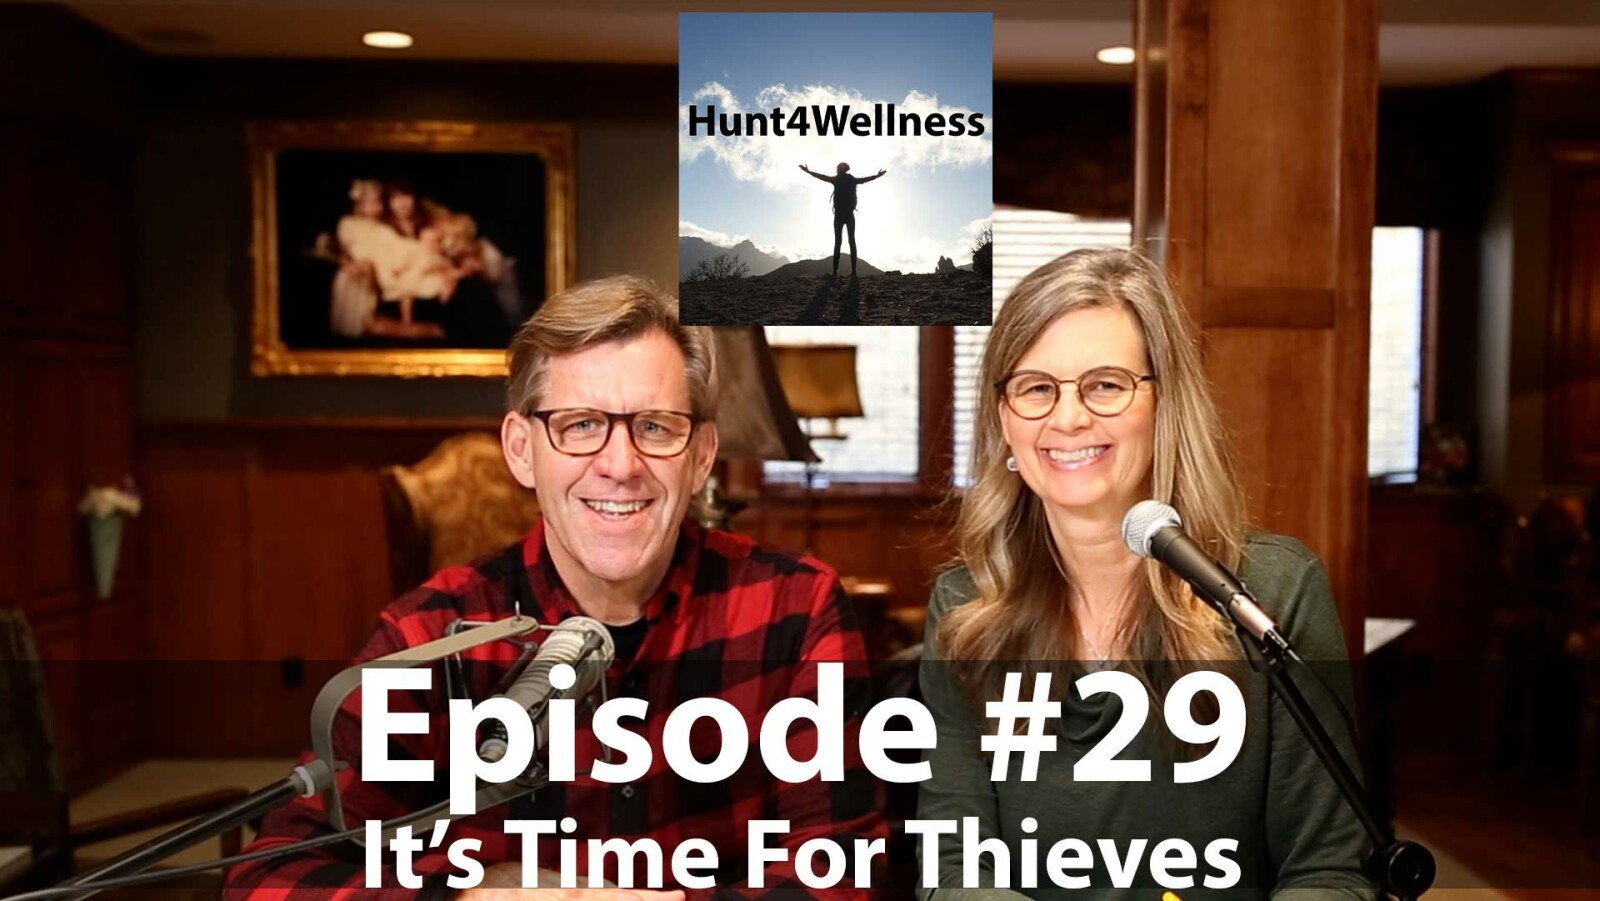 Episode #29 - It's Time For Thieves